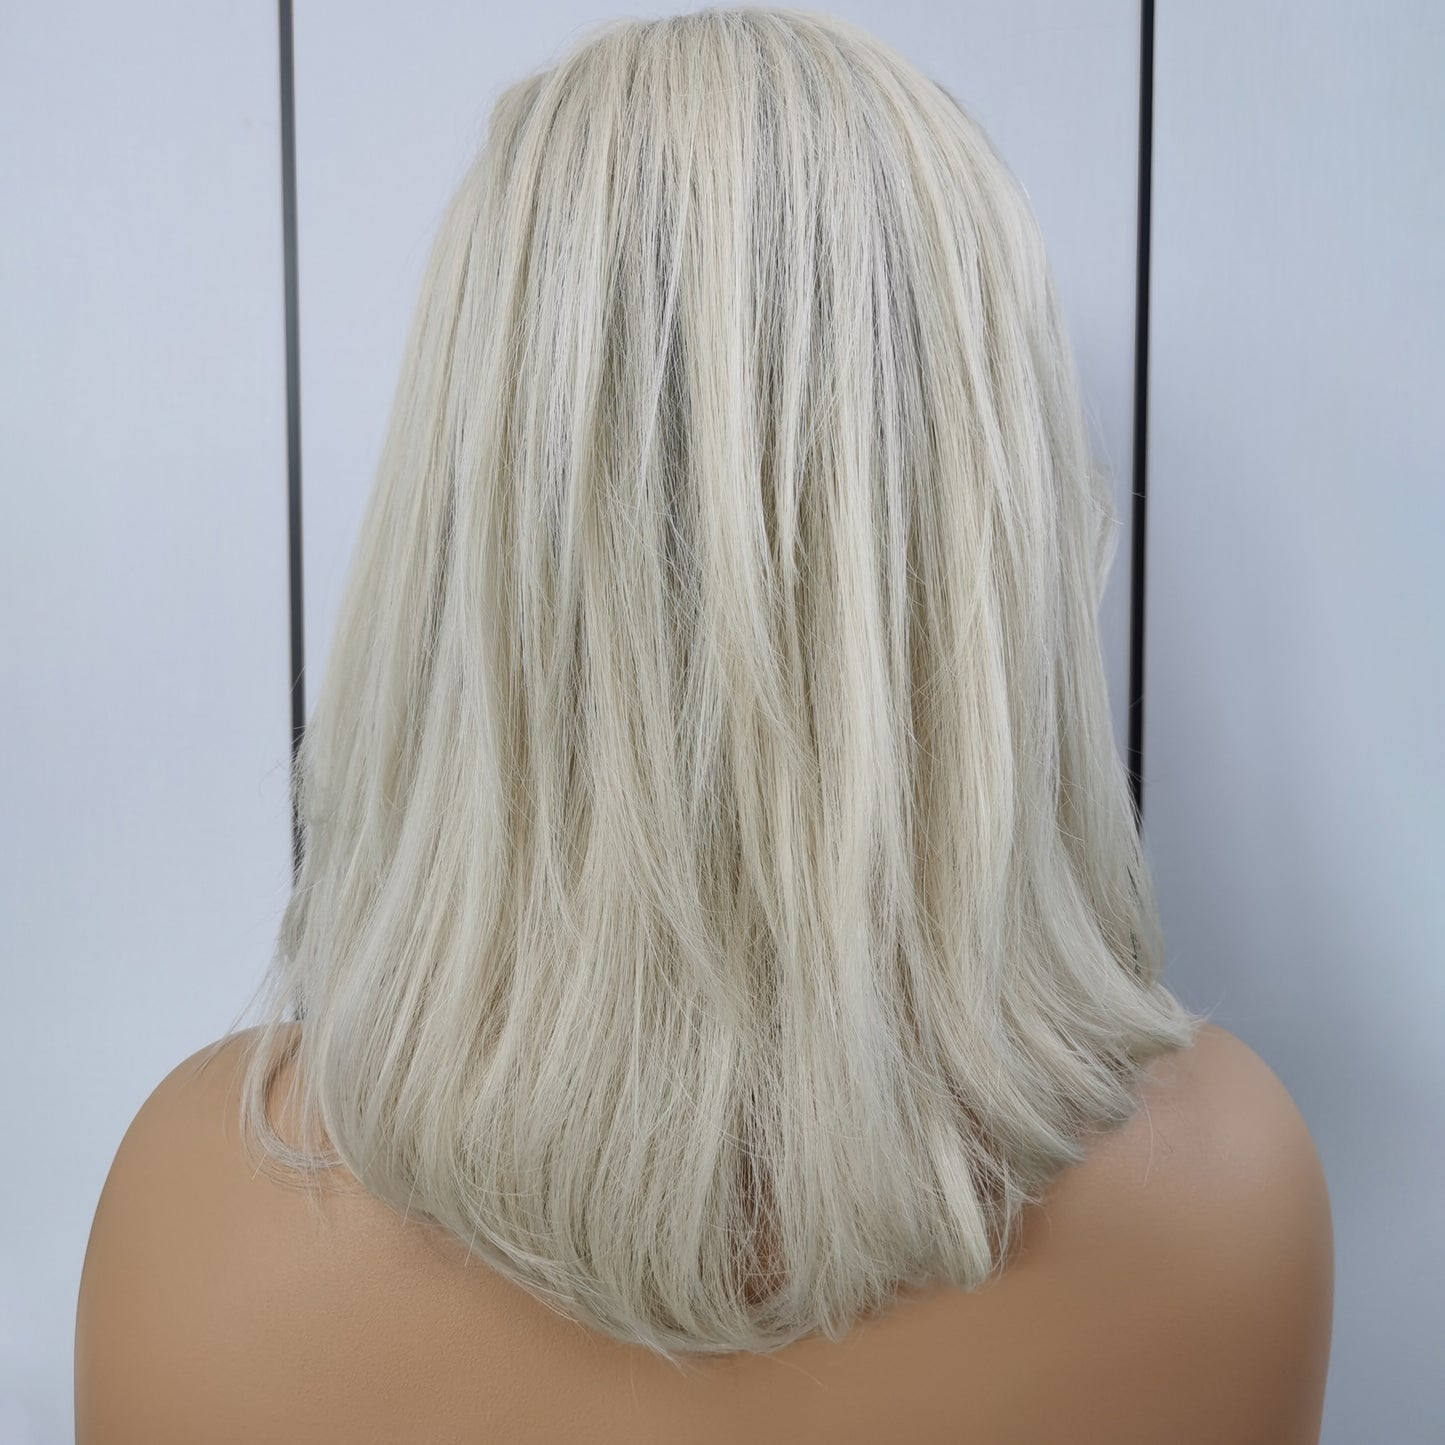 CAMILA-Icy Blonde balayage with Brown Root